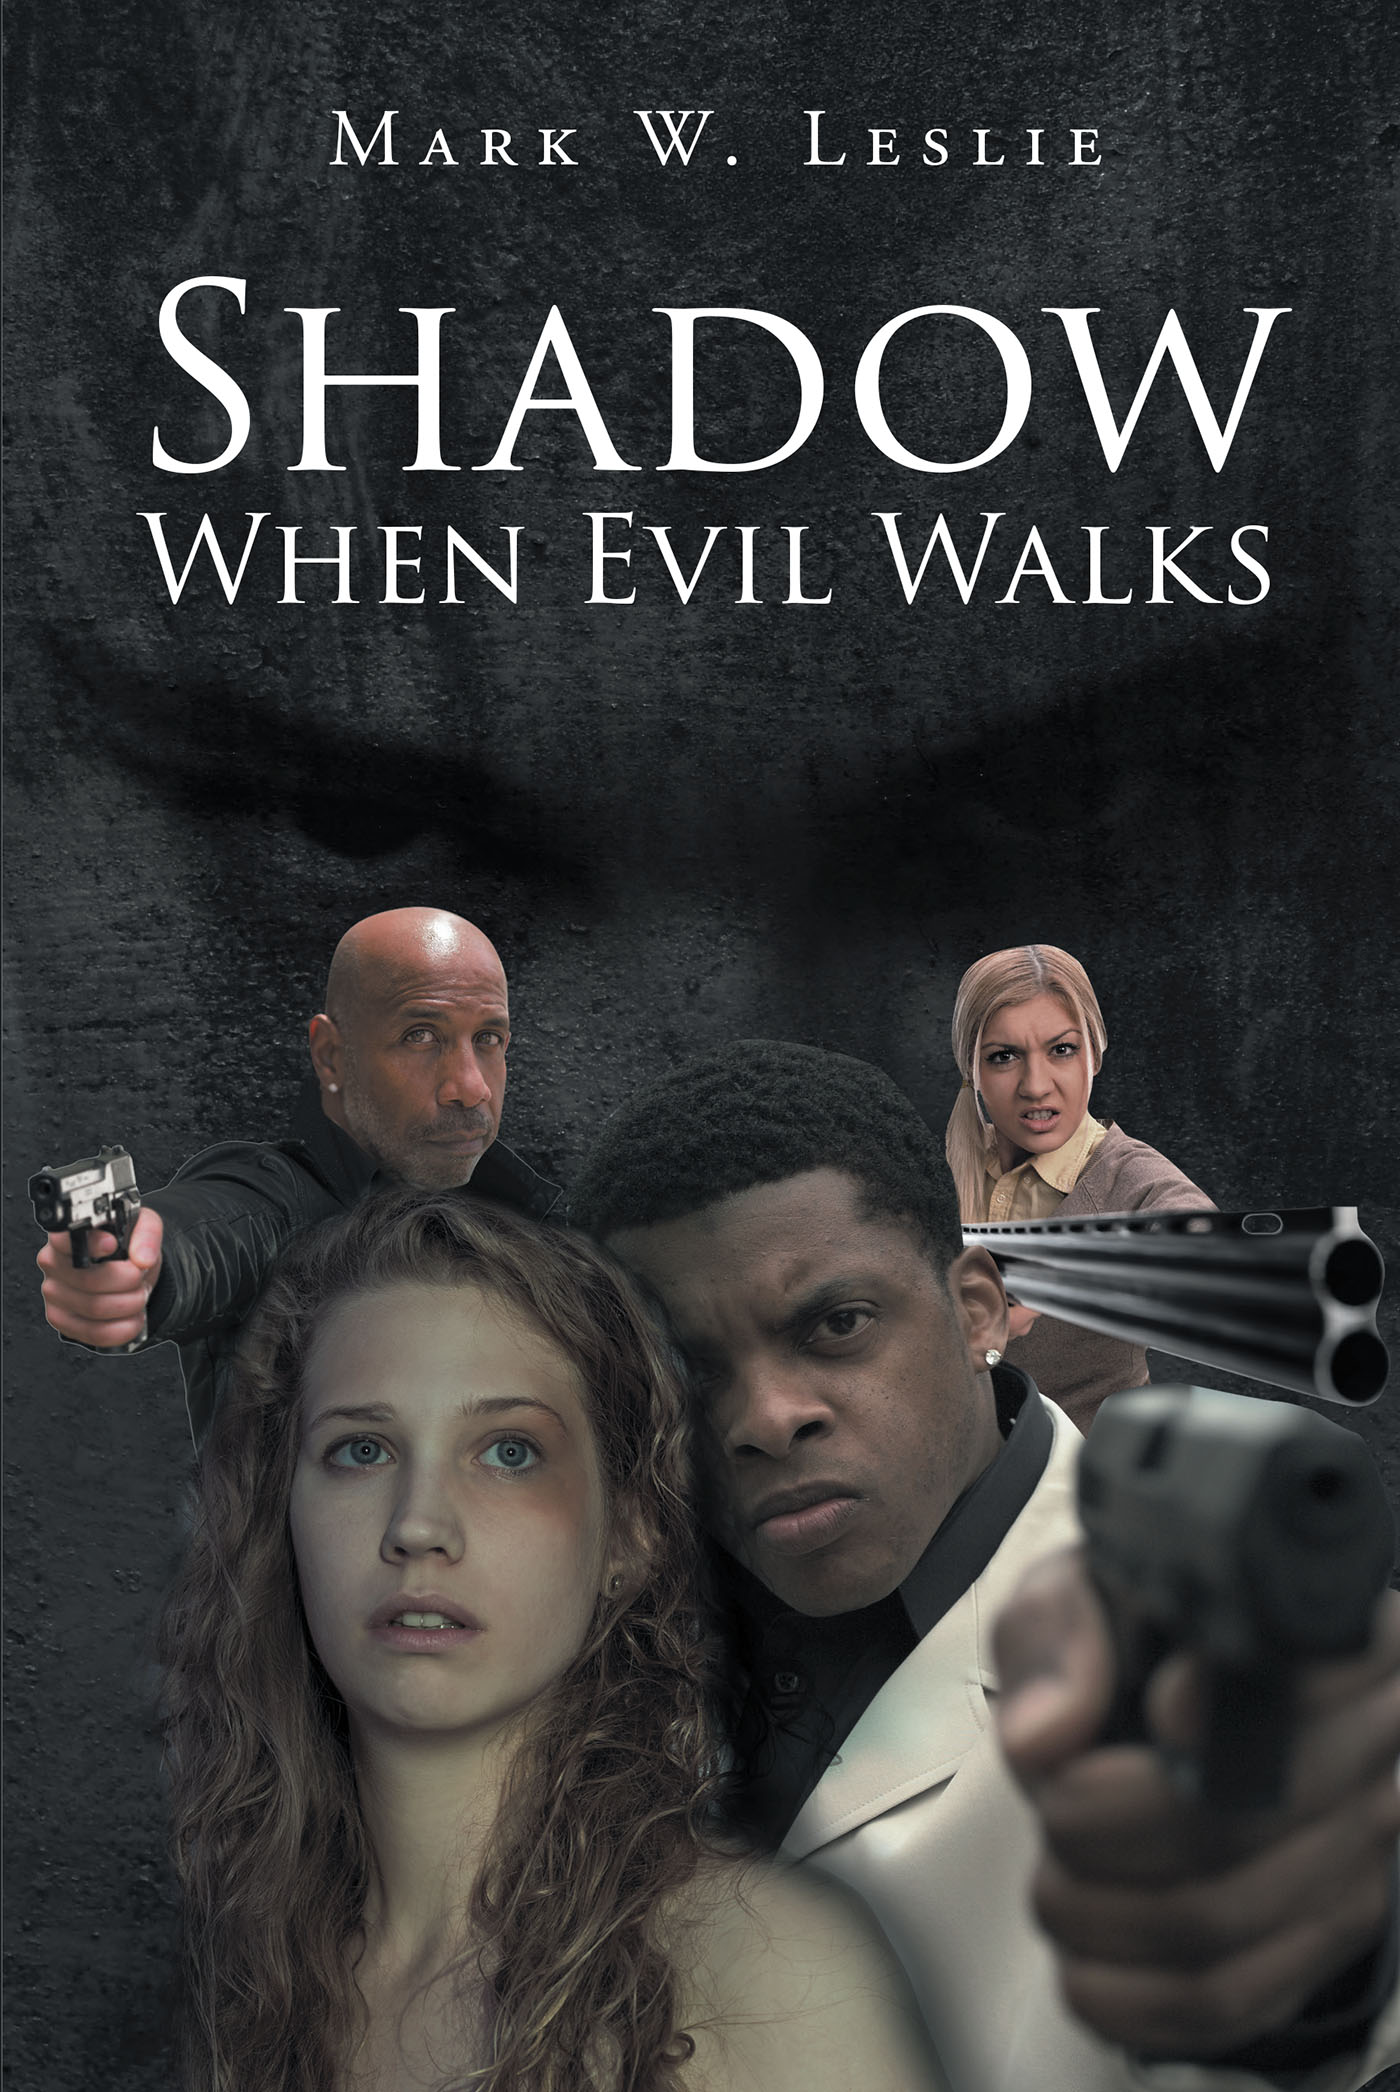 Mark W. Leslie’s New Book, "Shadow When Evil Walks," is a Mysterious and Curious Novel All About a Darkness That Looms Over the City That Never Sleeps